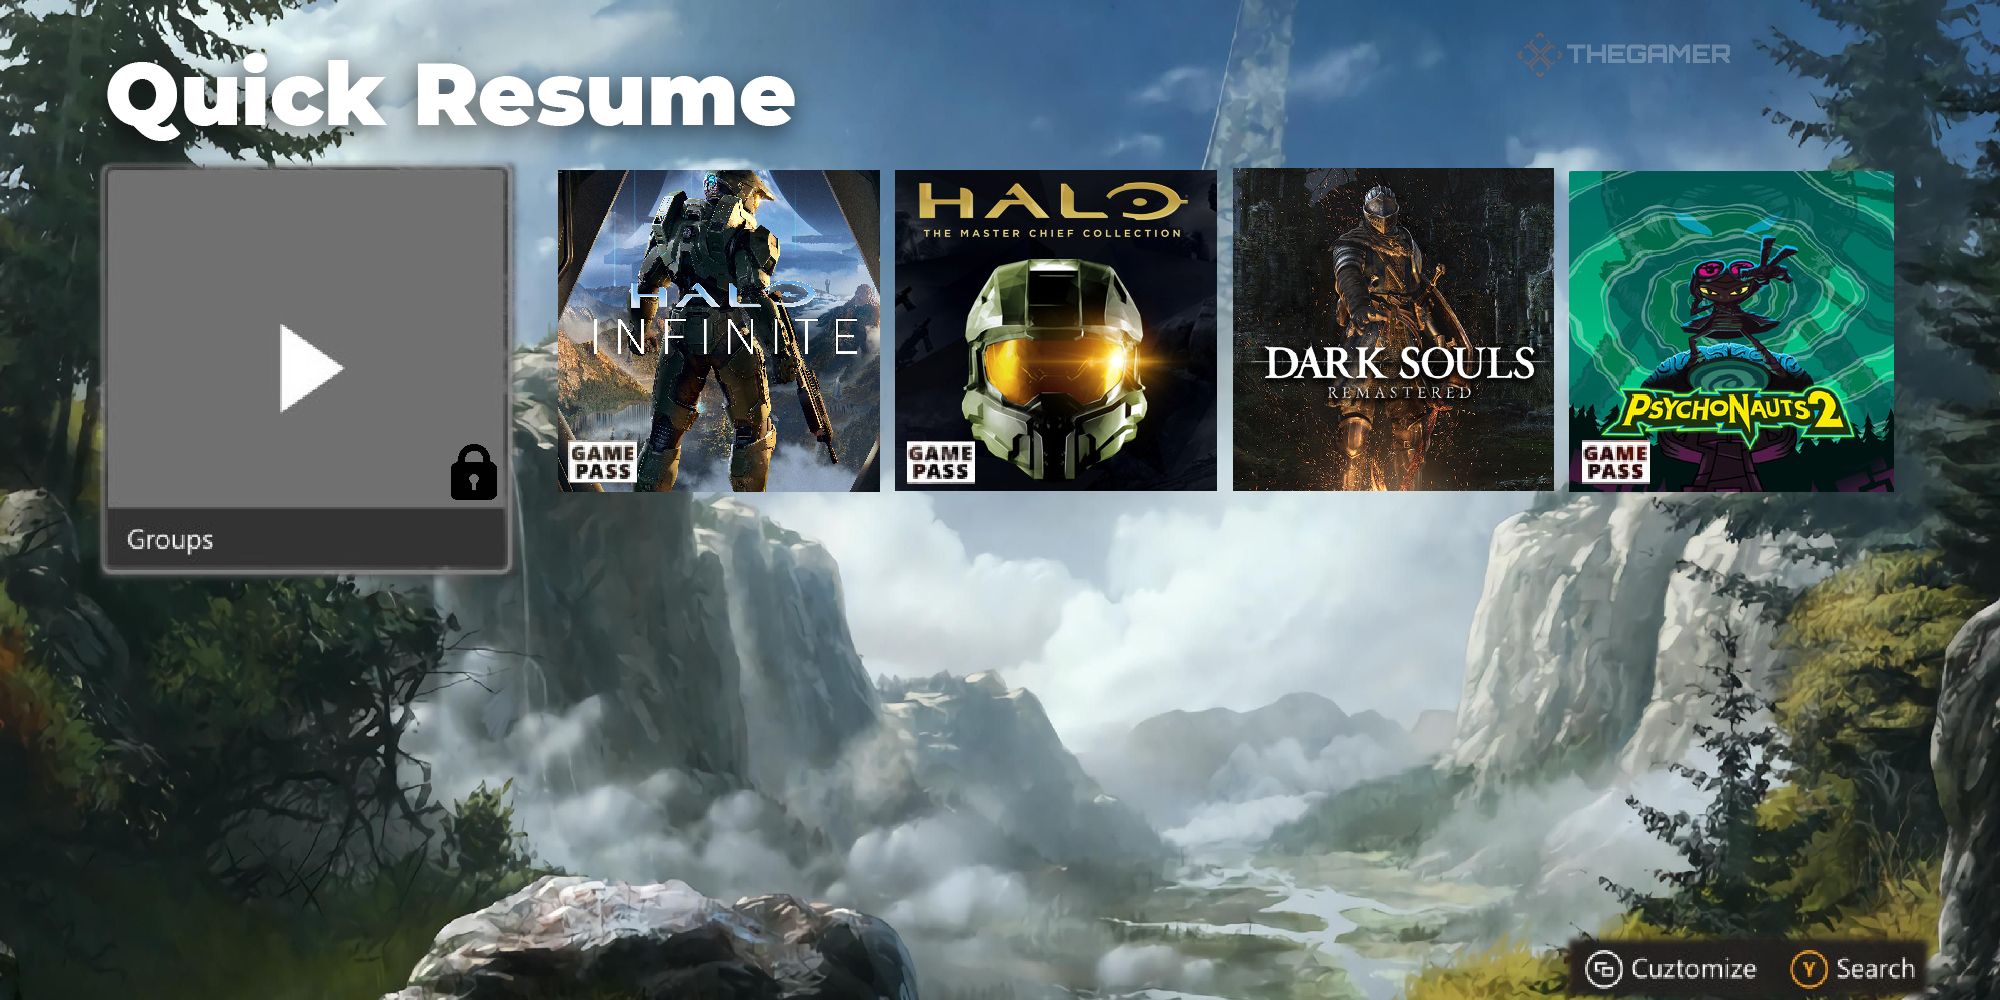 A quick resume screen with games like halo infinite, the master chief collection, dark souls, and psychonauts 2